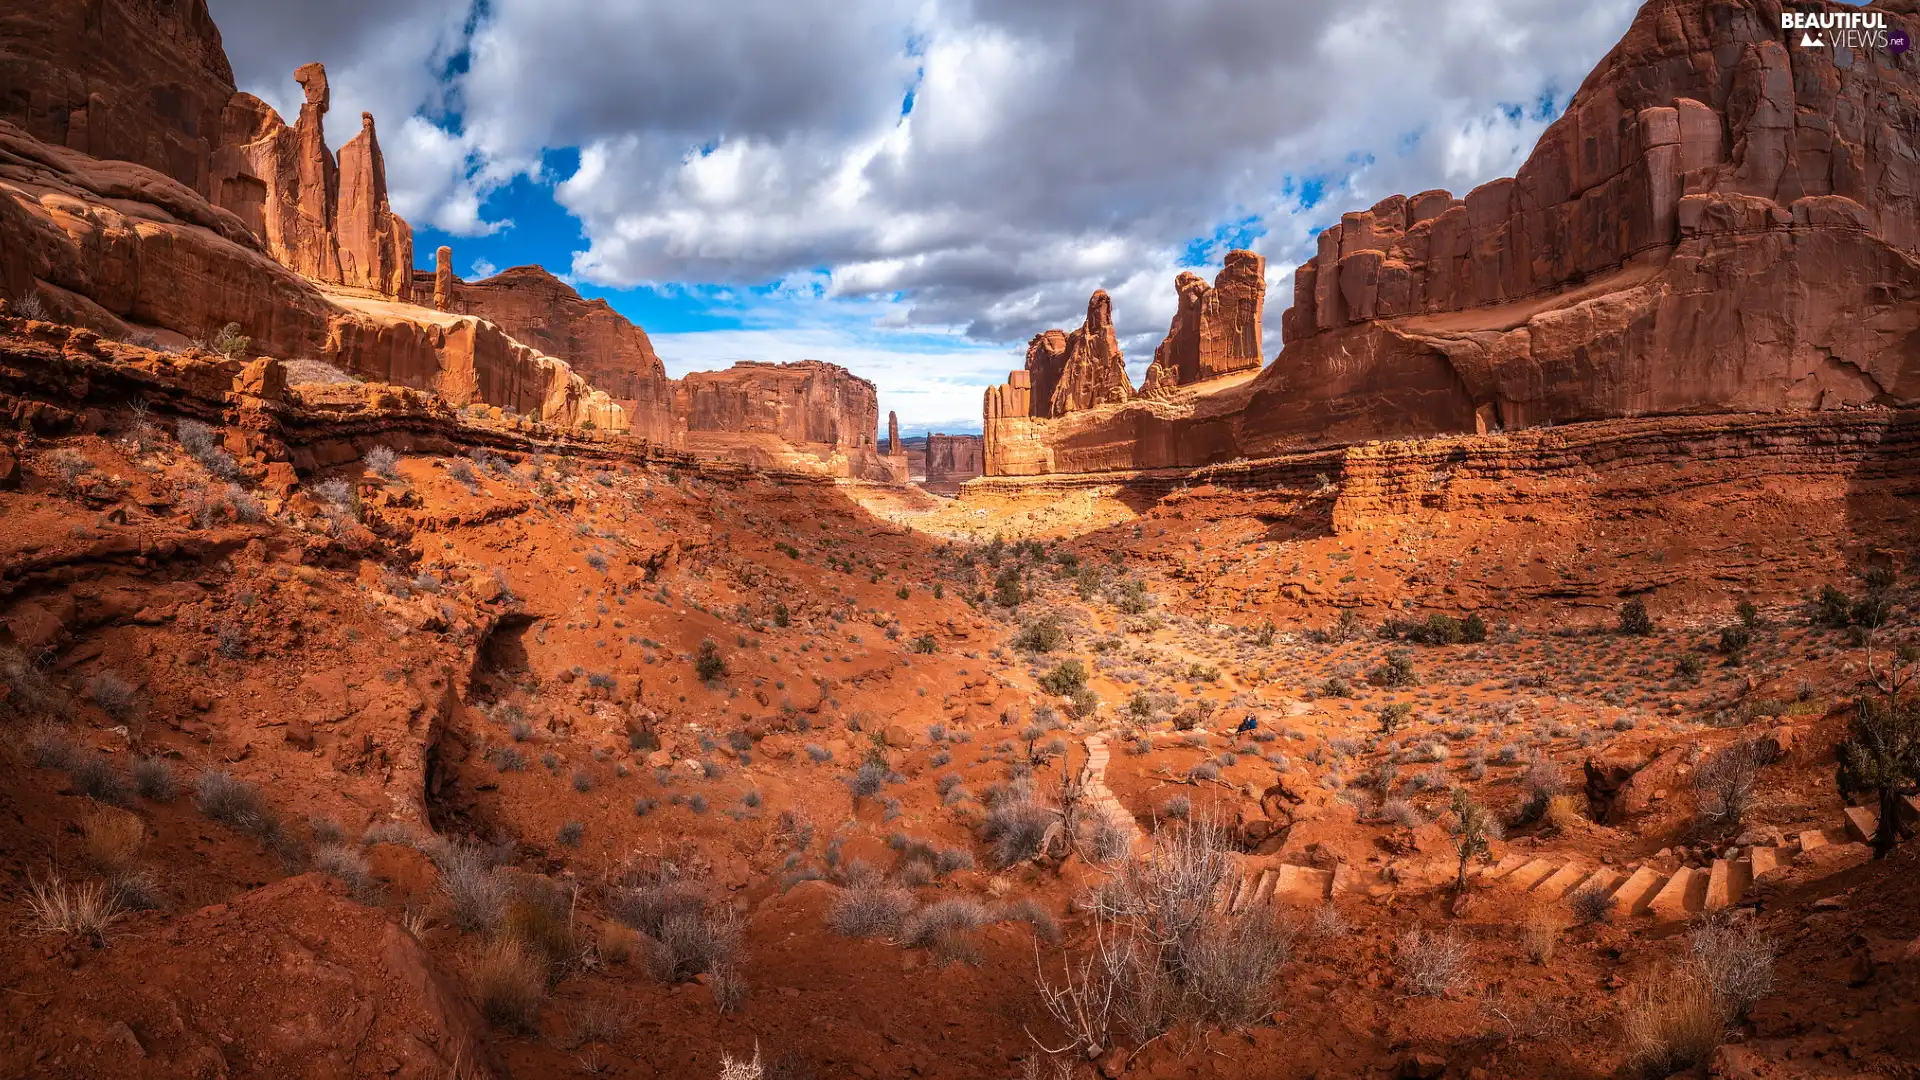 rocks, Utah State, The United States, Arches National Park